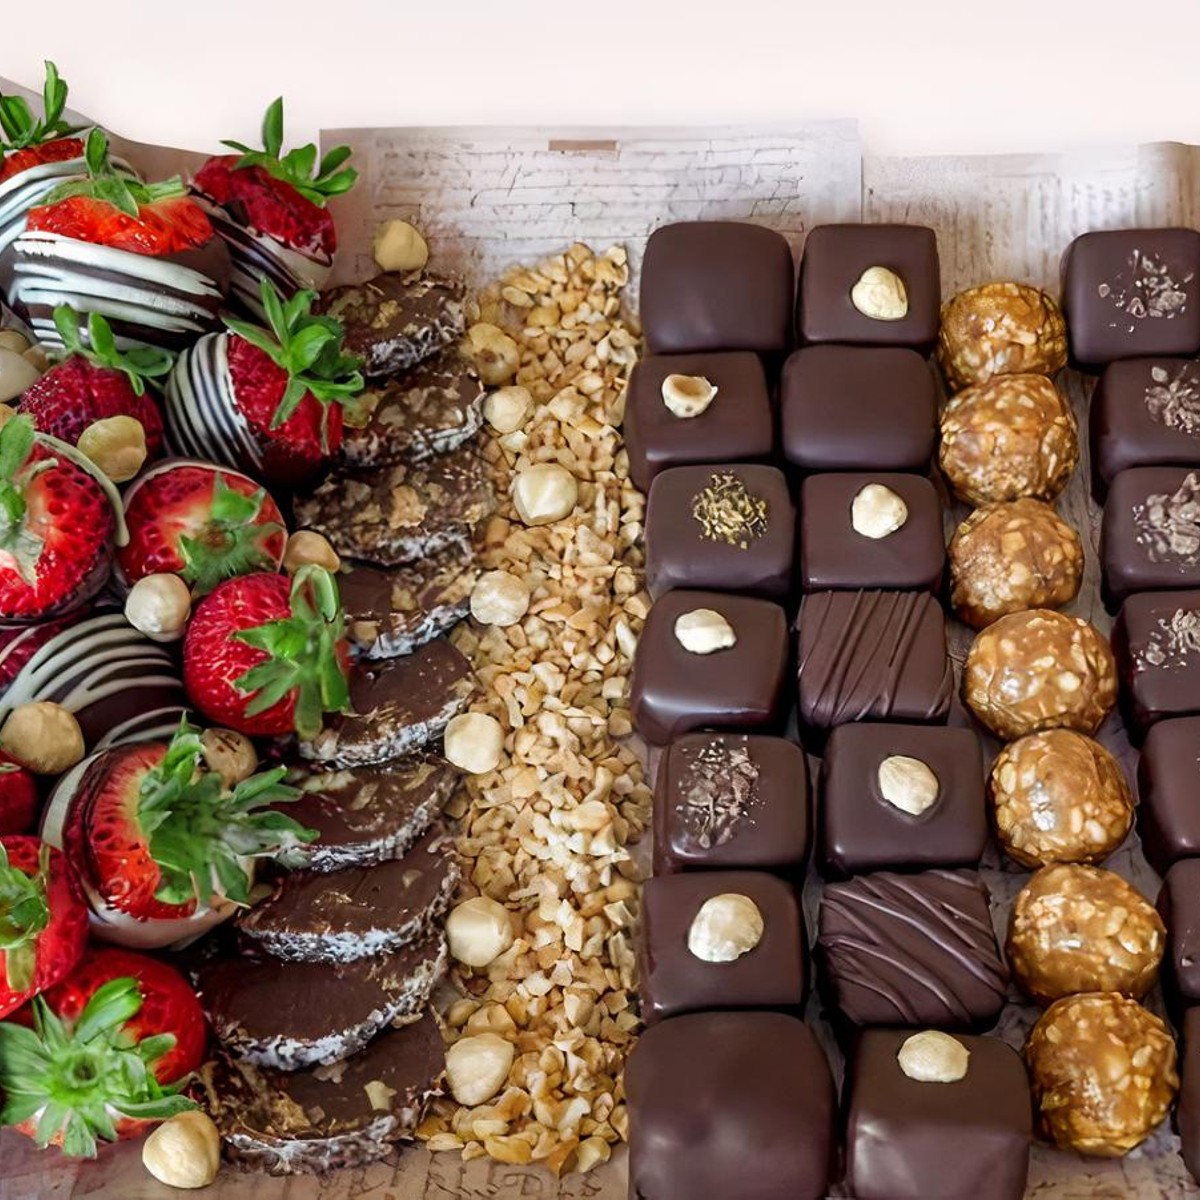 Best Same Day Gift Delivery San Diego – Rayluca Chocolate